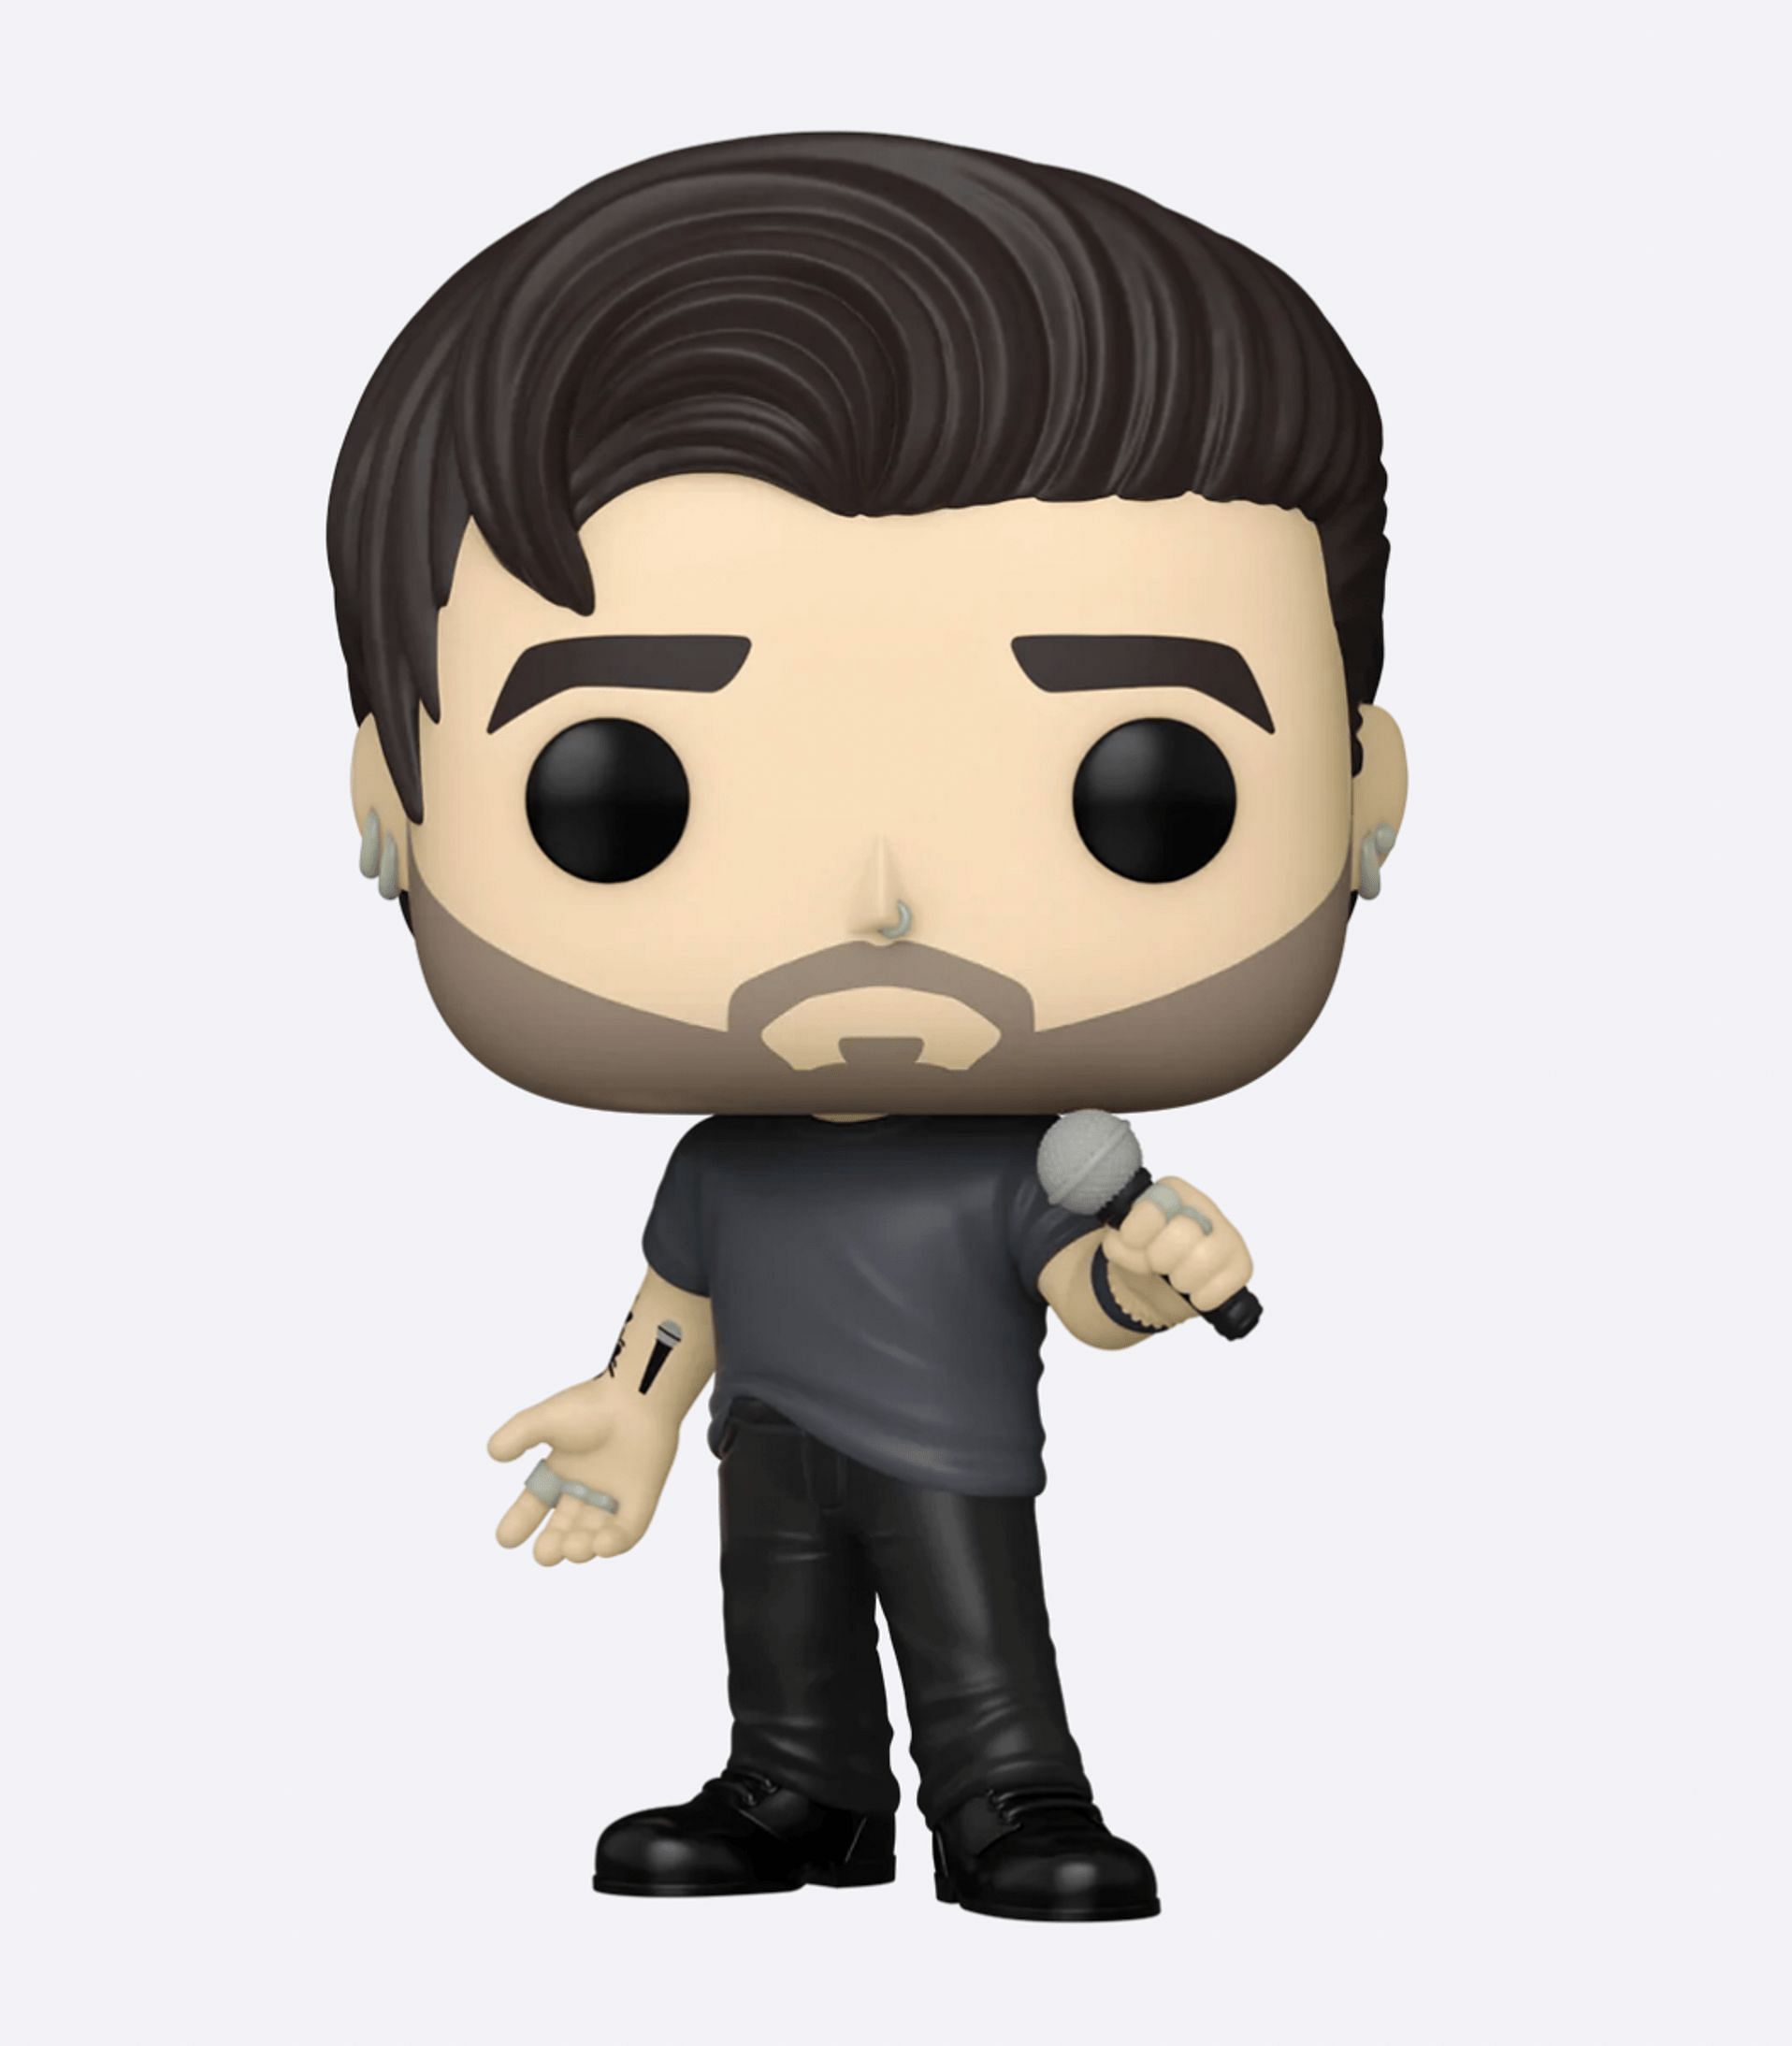 Excited fans pre-ordered their Zayn Malik Funko Pop from the website; the figurine goes out of stock (Image via Funko Pop)